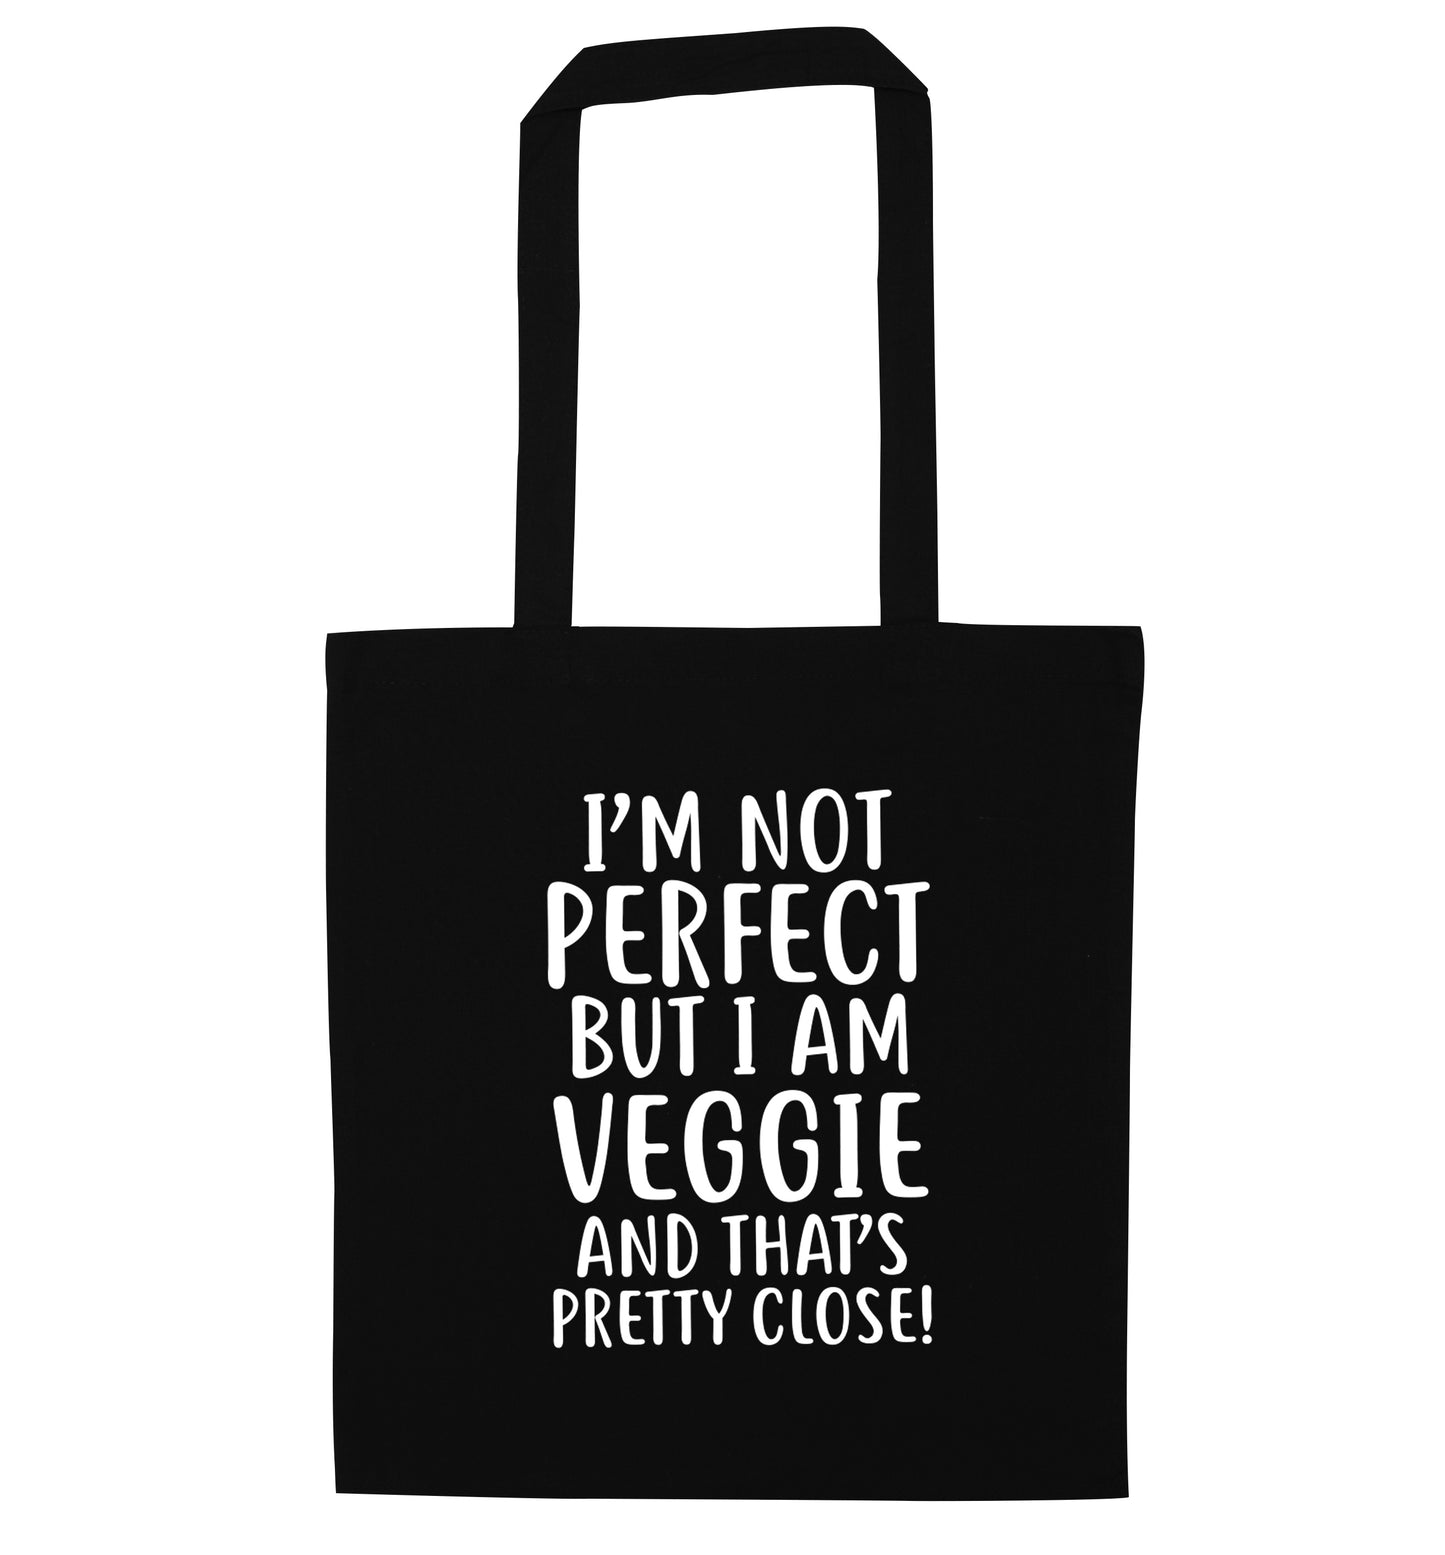 Might not be perfect but I am veggie black tote bag